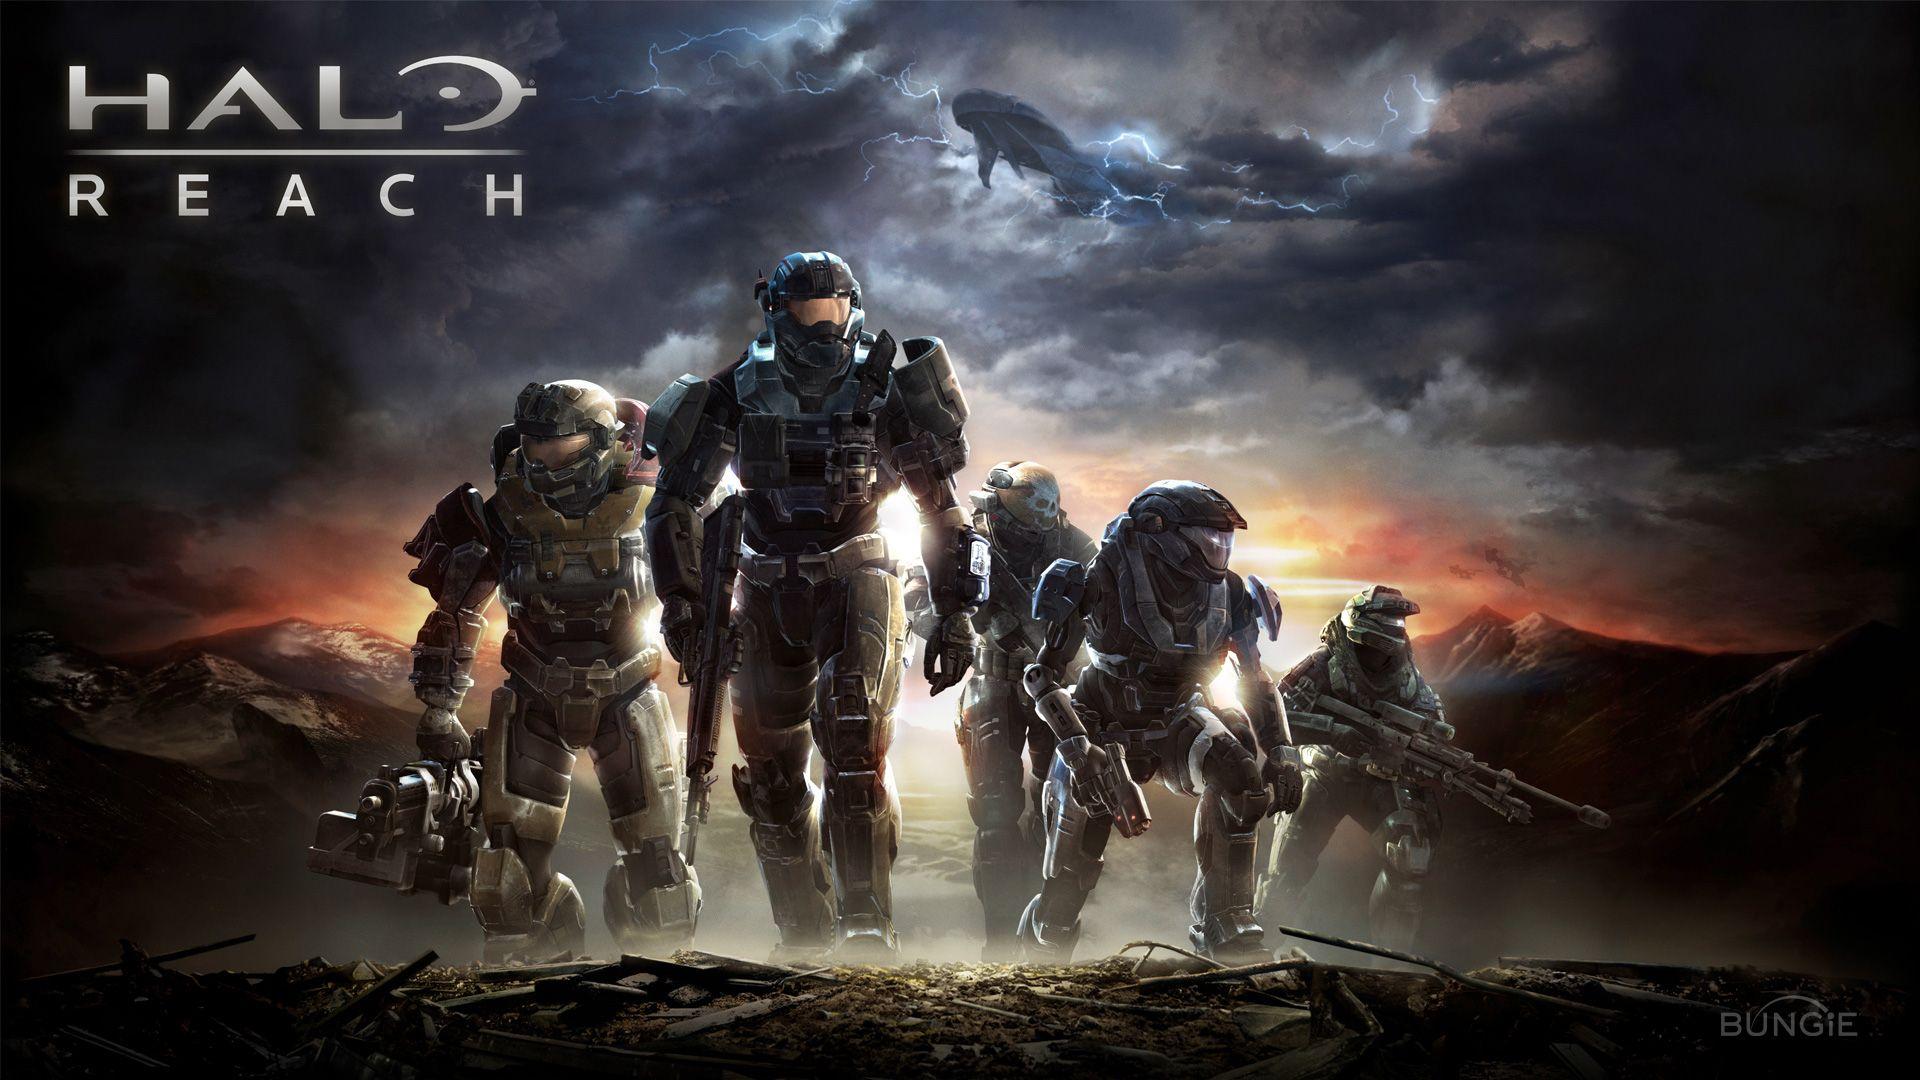 All About Halo image Halo Wallpaper HD wallpaper and background